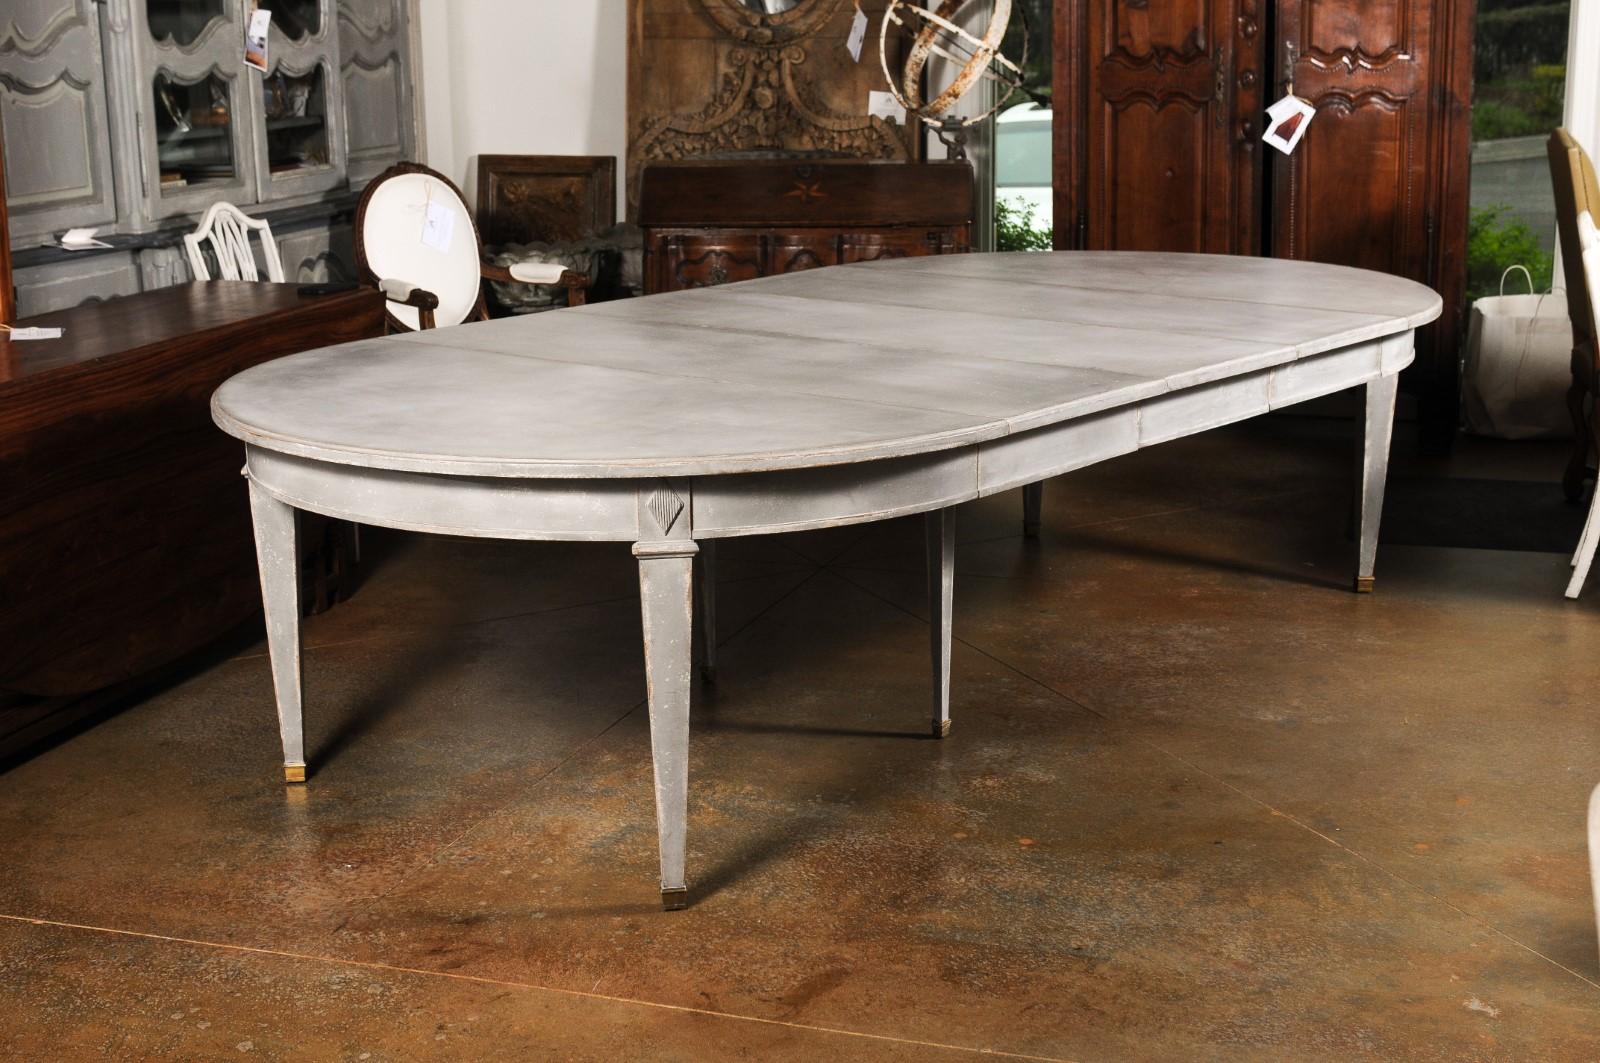 20th Century Swedish Gustavian Style 1900s Painted Oval Dining Room Table with Three Leaves